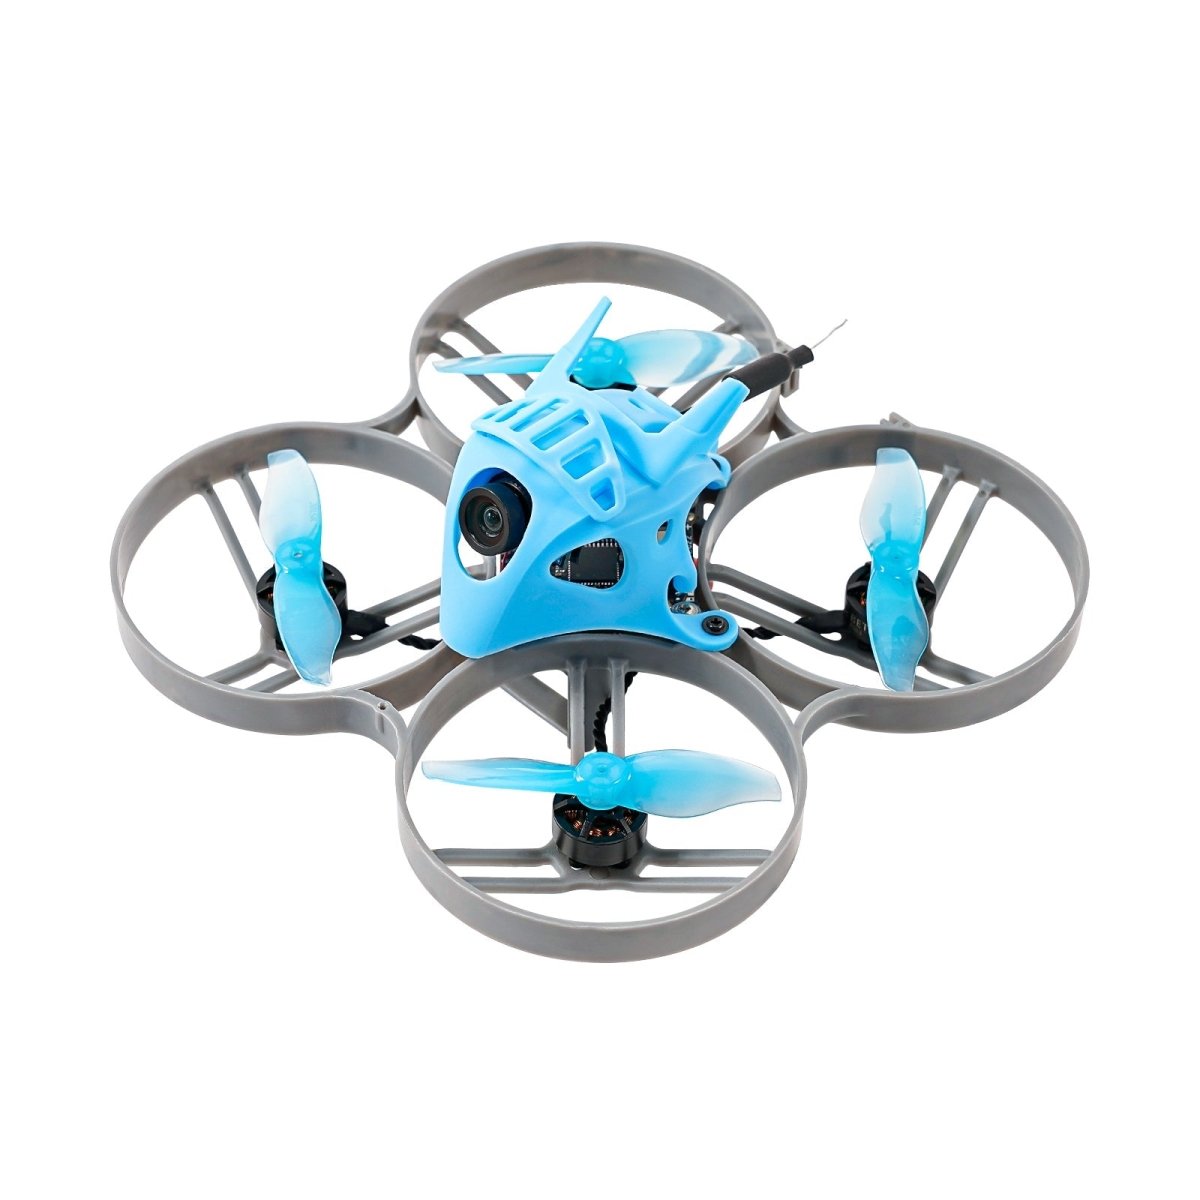 BETAFPV releases Meteor75 Pro, a powerful FPV racing, freestyle drone